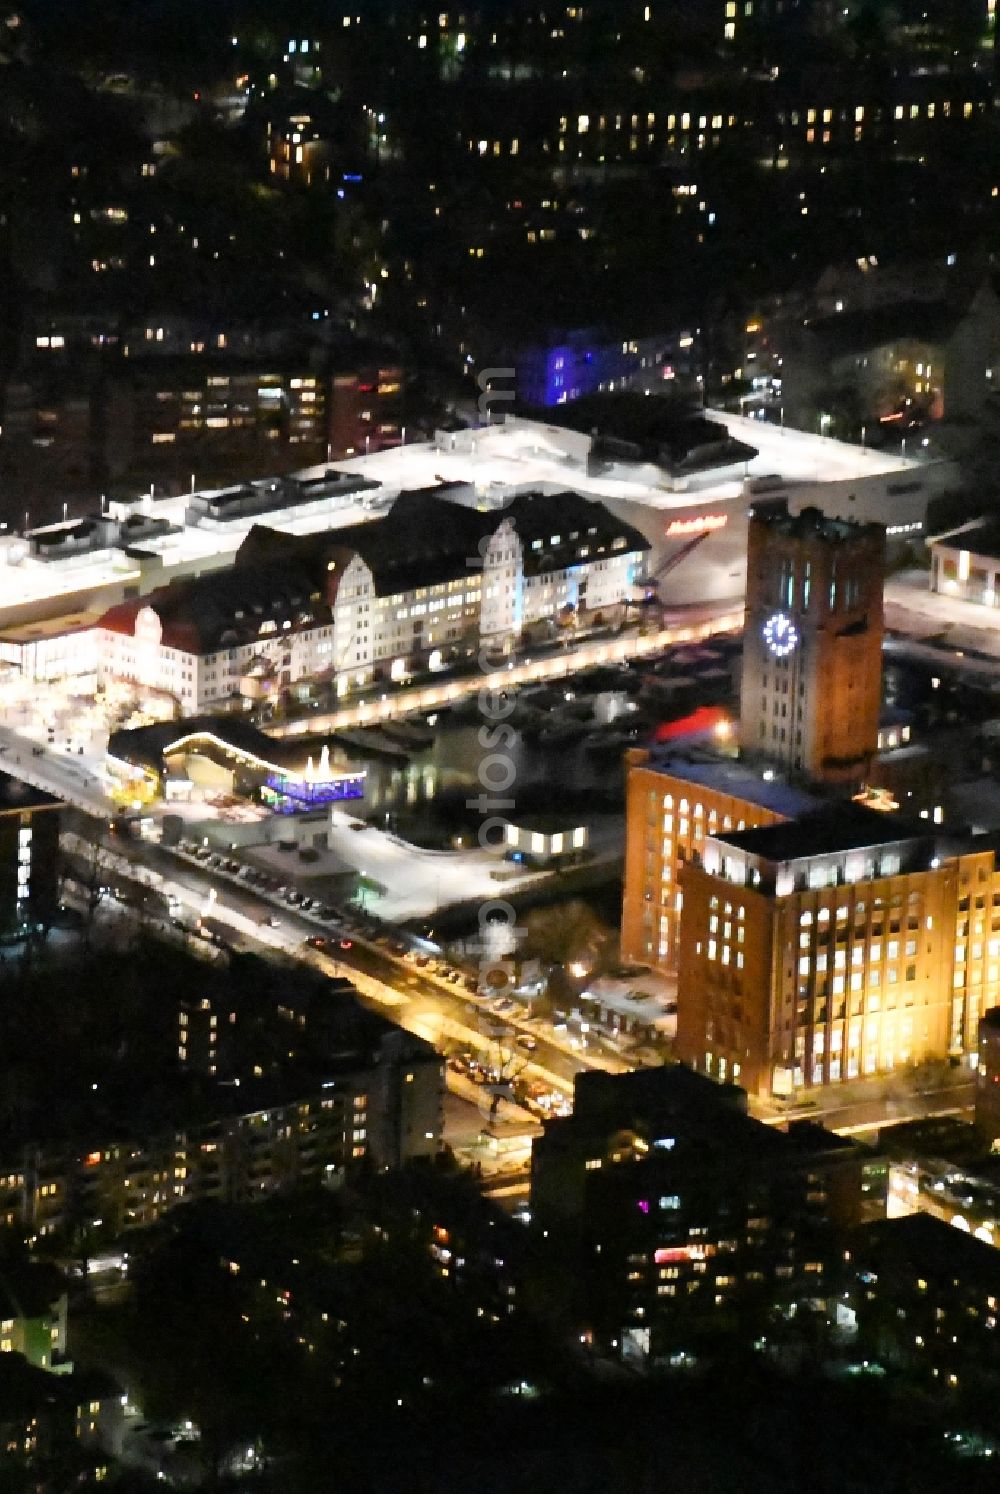 Aerial photograph at night Berlin - Night image with a view of the shopping mall Tempelhofer Hafen and Ullsteinhaus on Tempelhofer Damm in the district of Tempelhof-Schoeneberg in Berlin